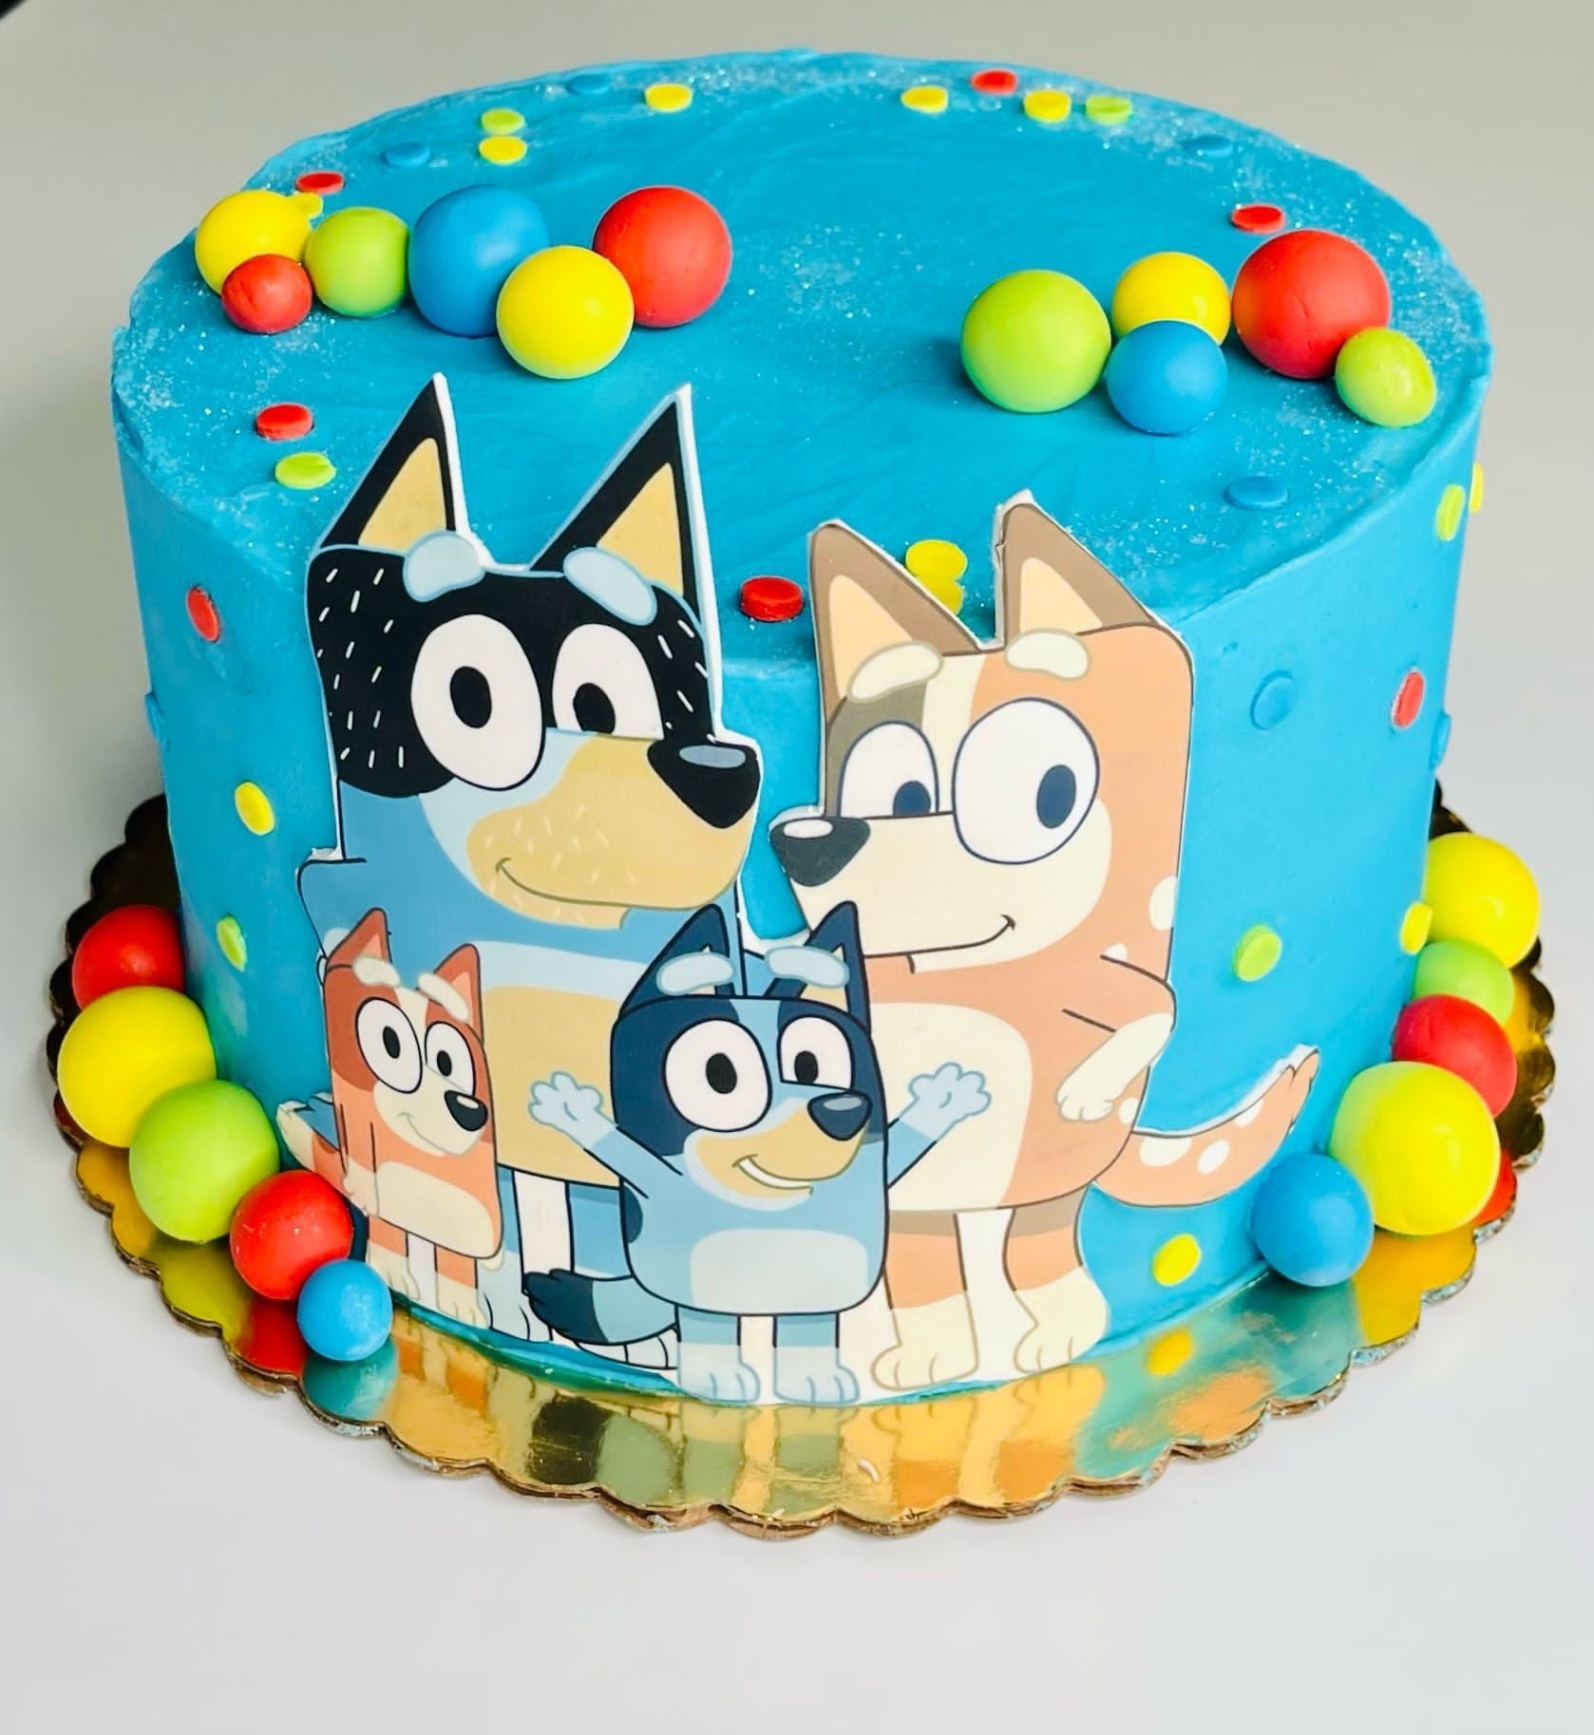 Get Creative With Adorable Bluey Cake Designs For A Party To Remember